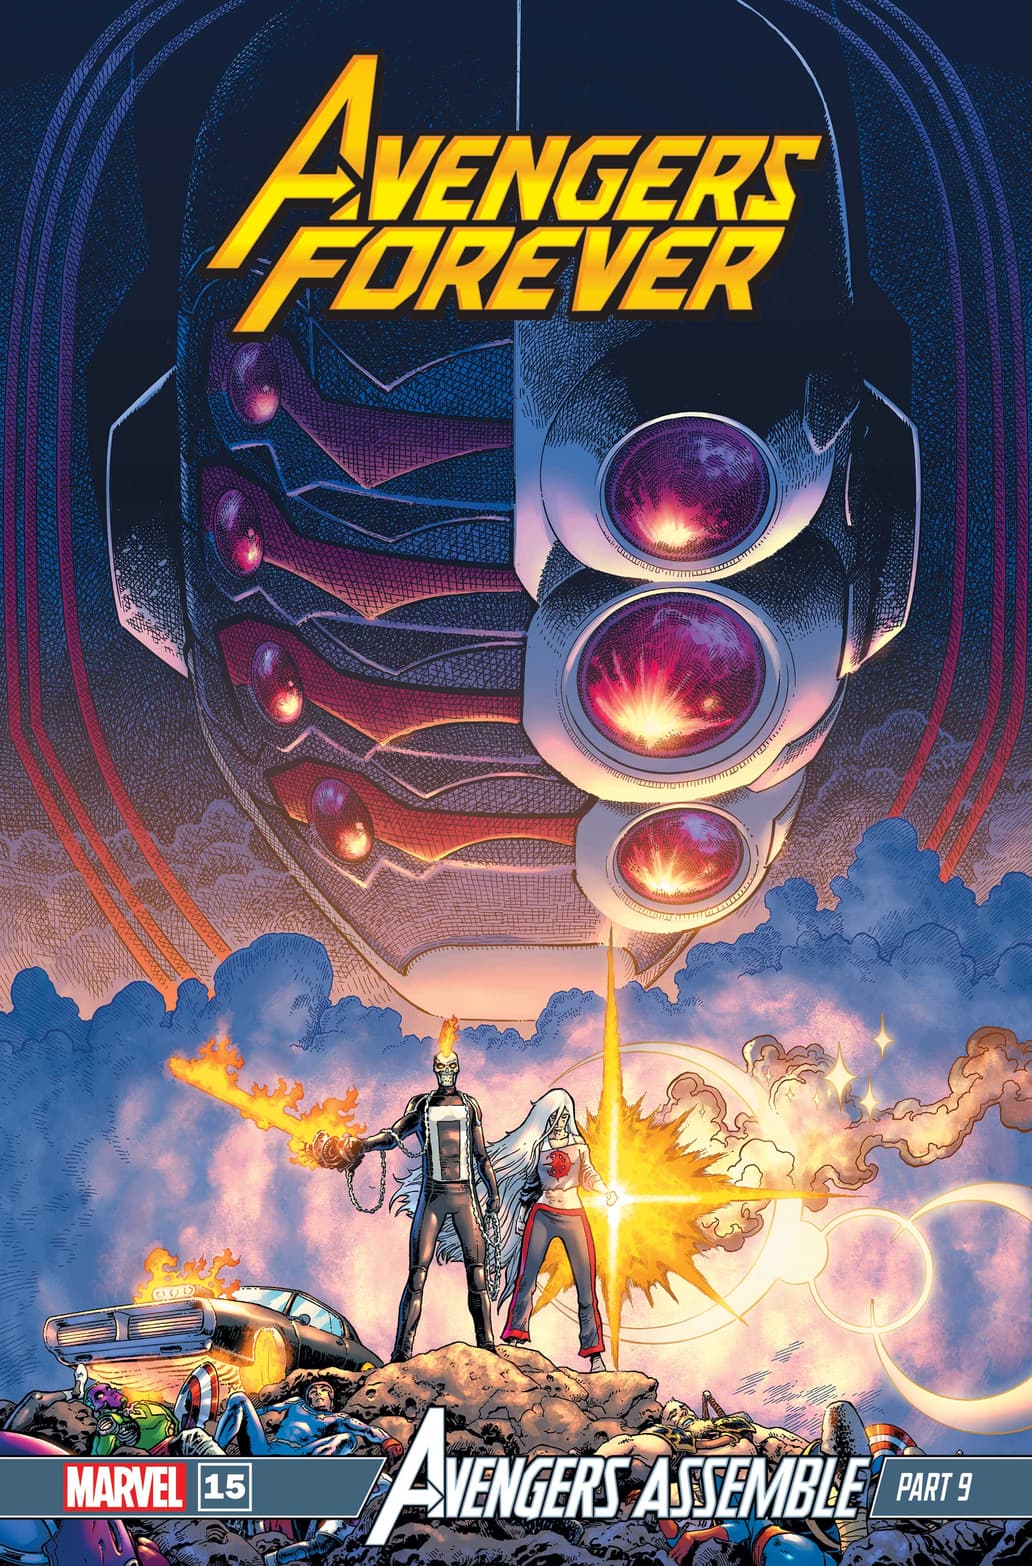 AVENGERS FOREVER #15 Art and Cover by AARON KUDER 